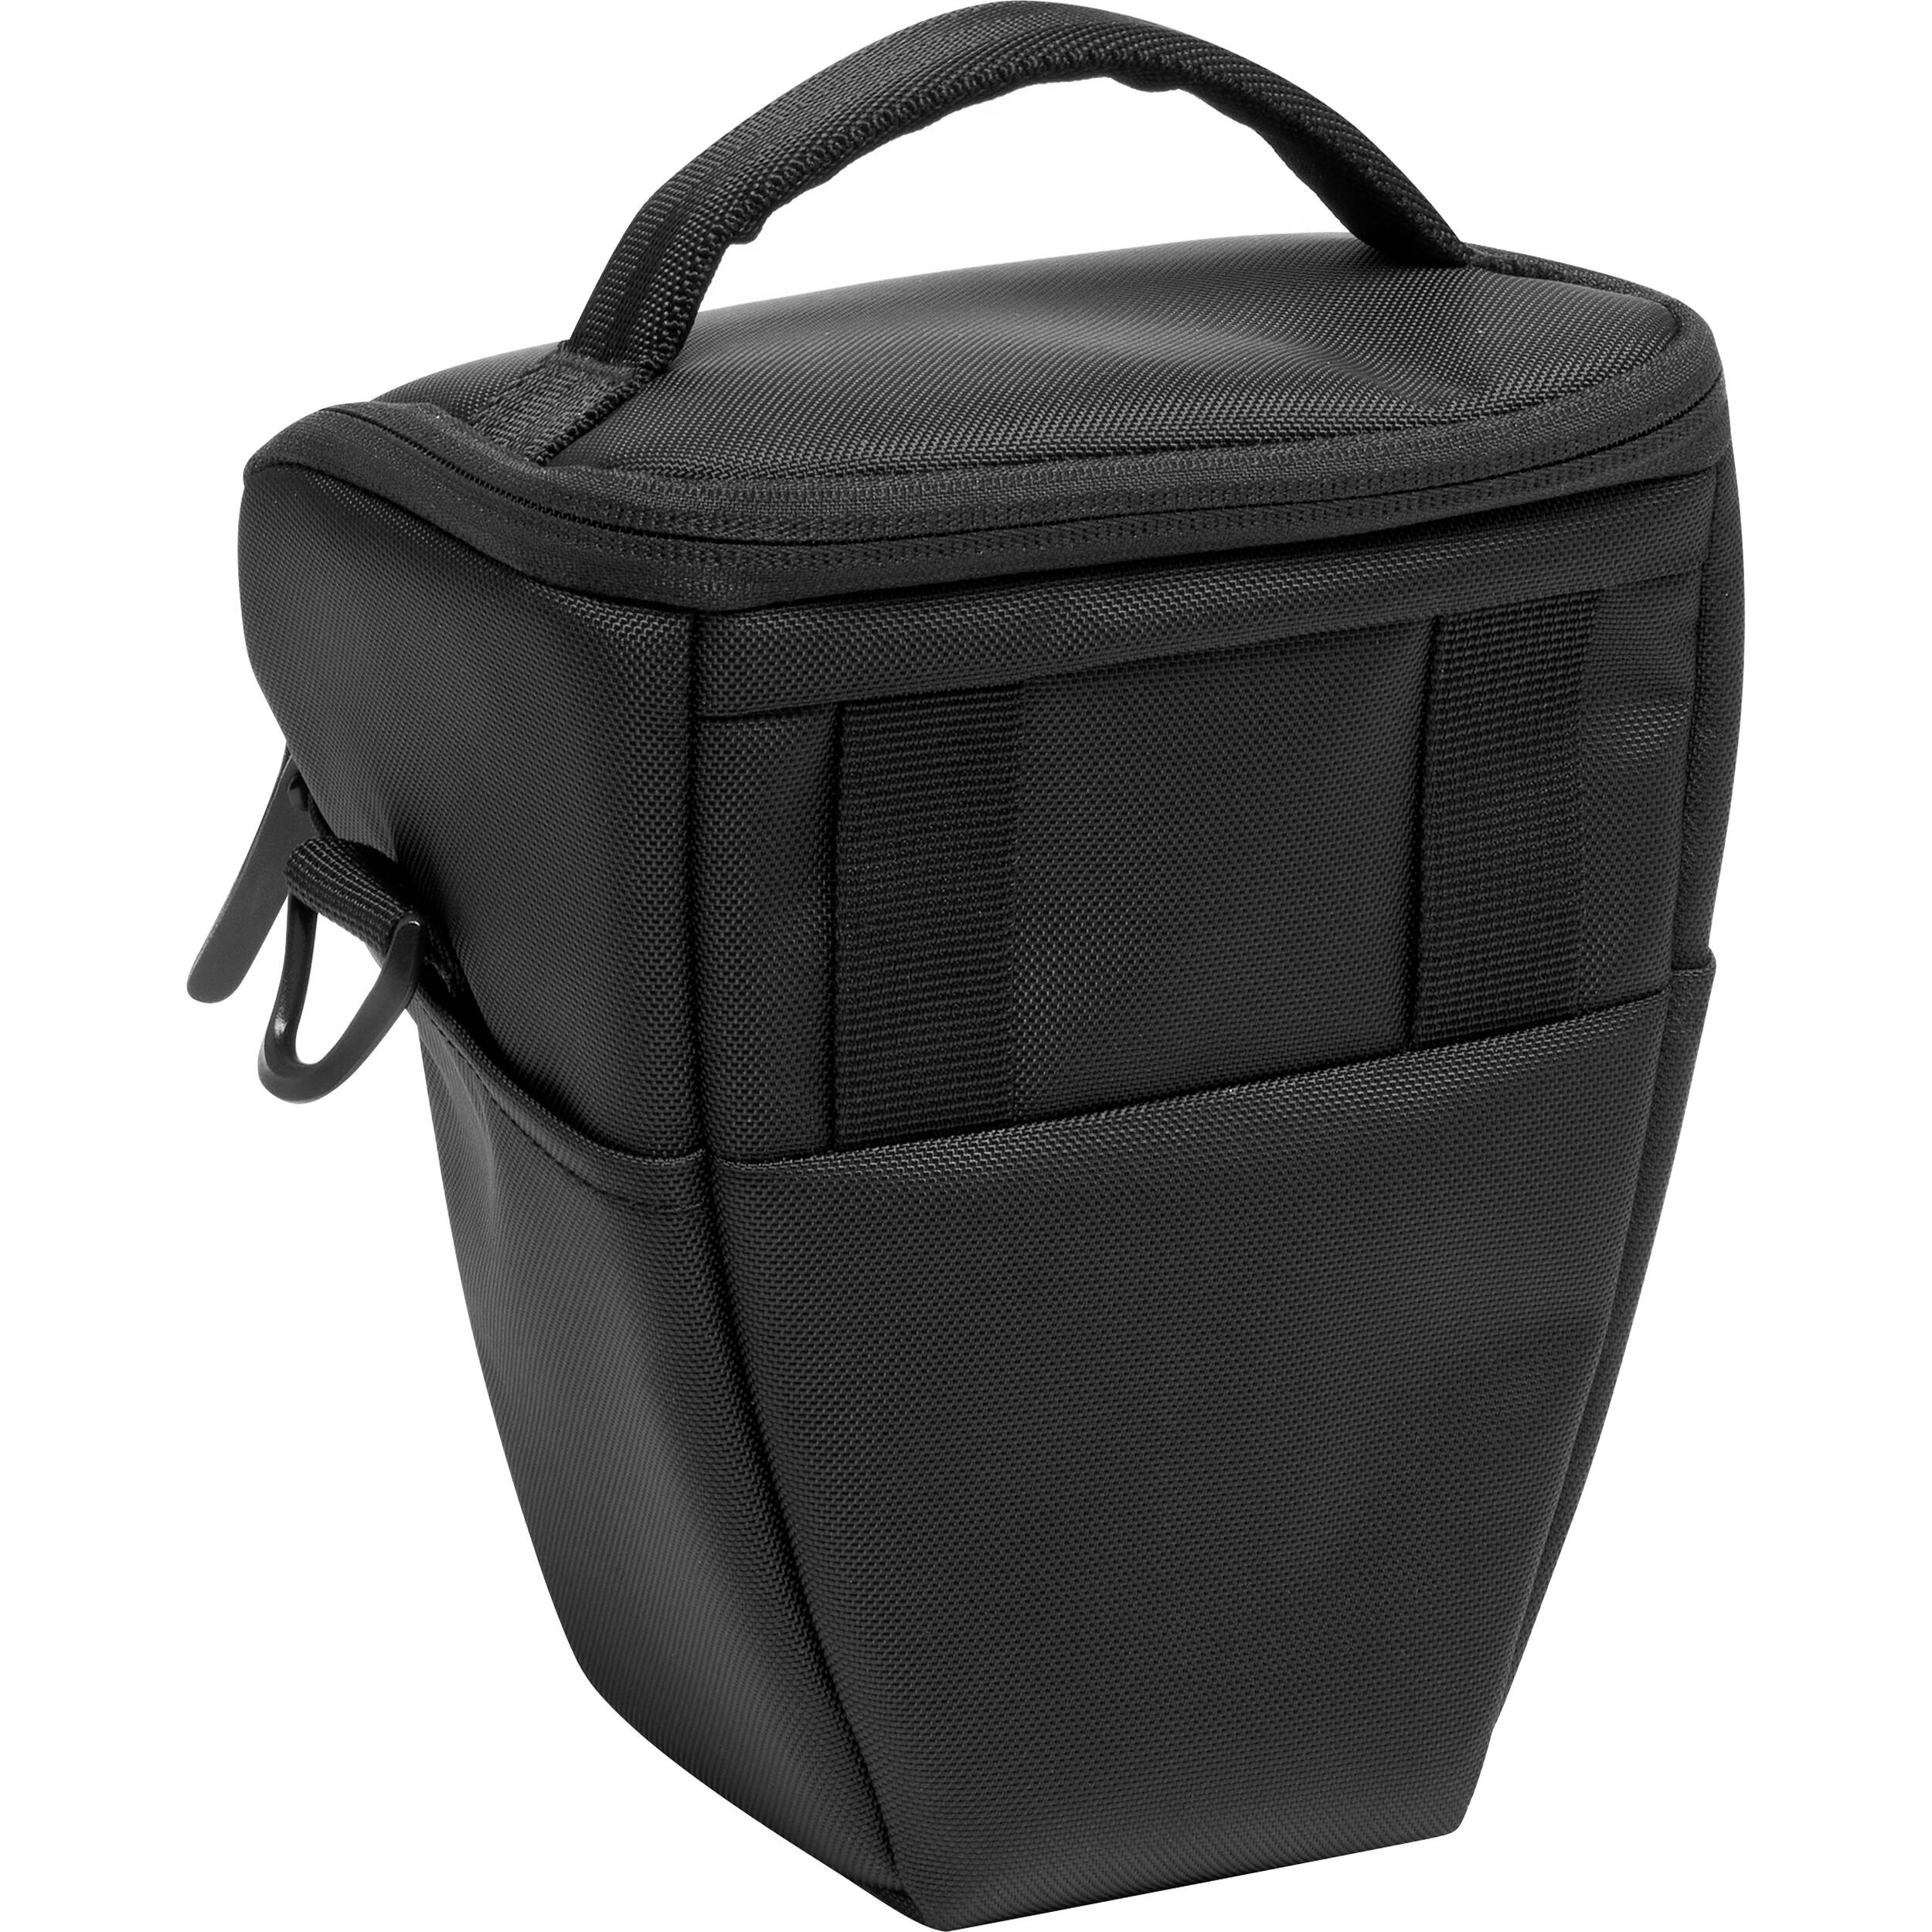 Manfrotto bag.  ADVANCED HOLSTER S III